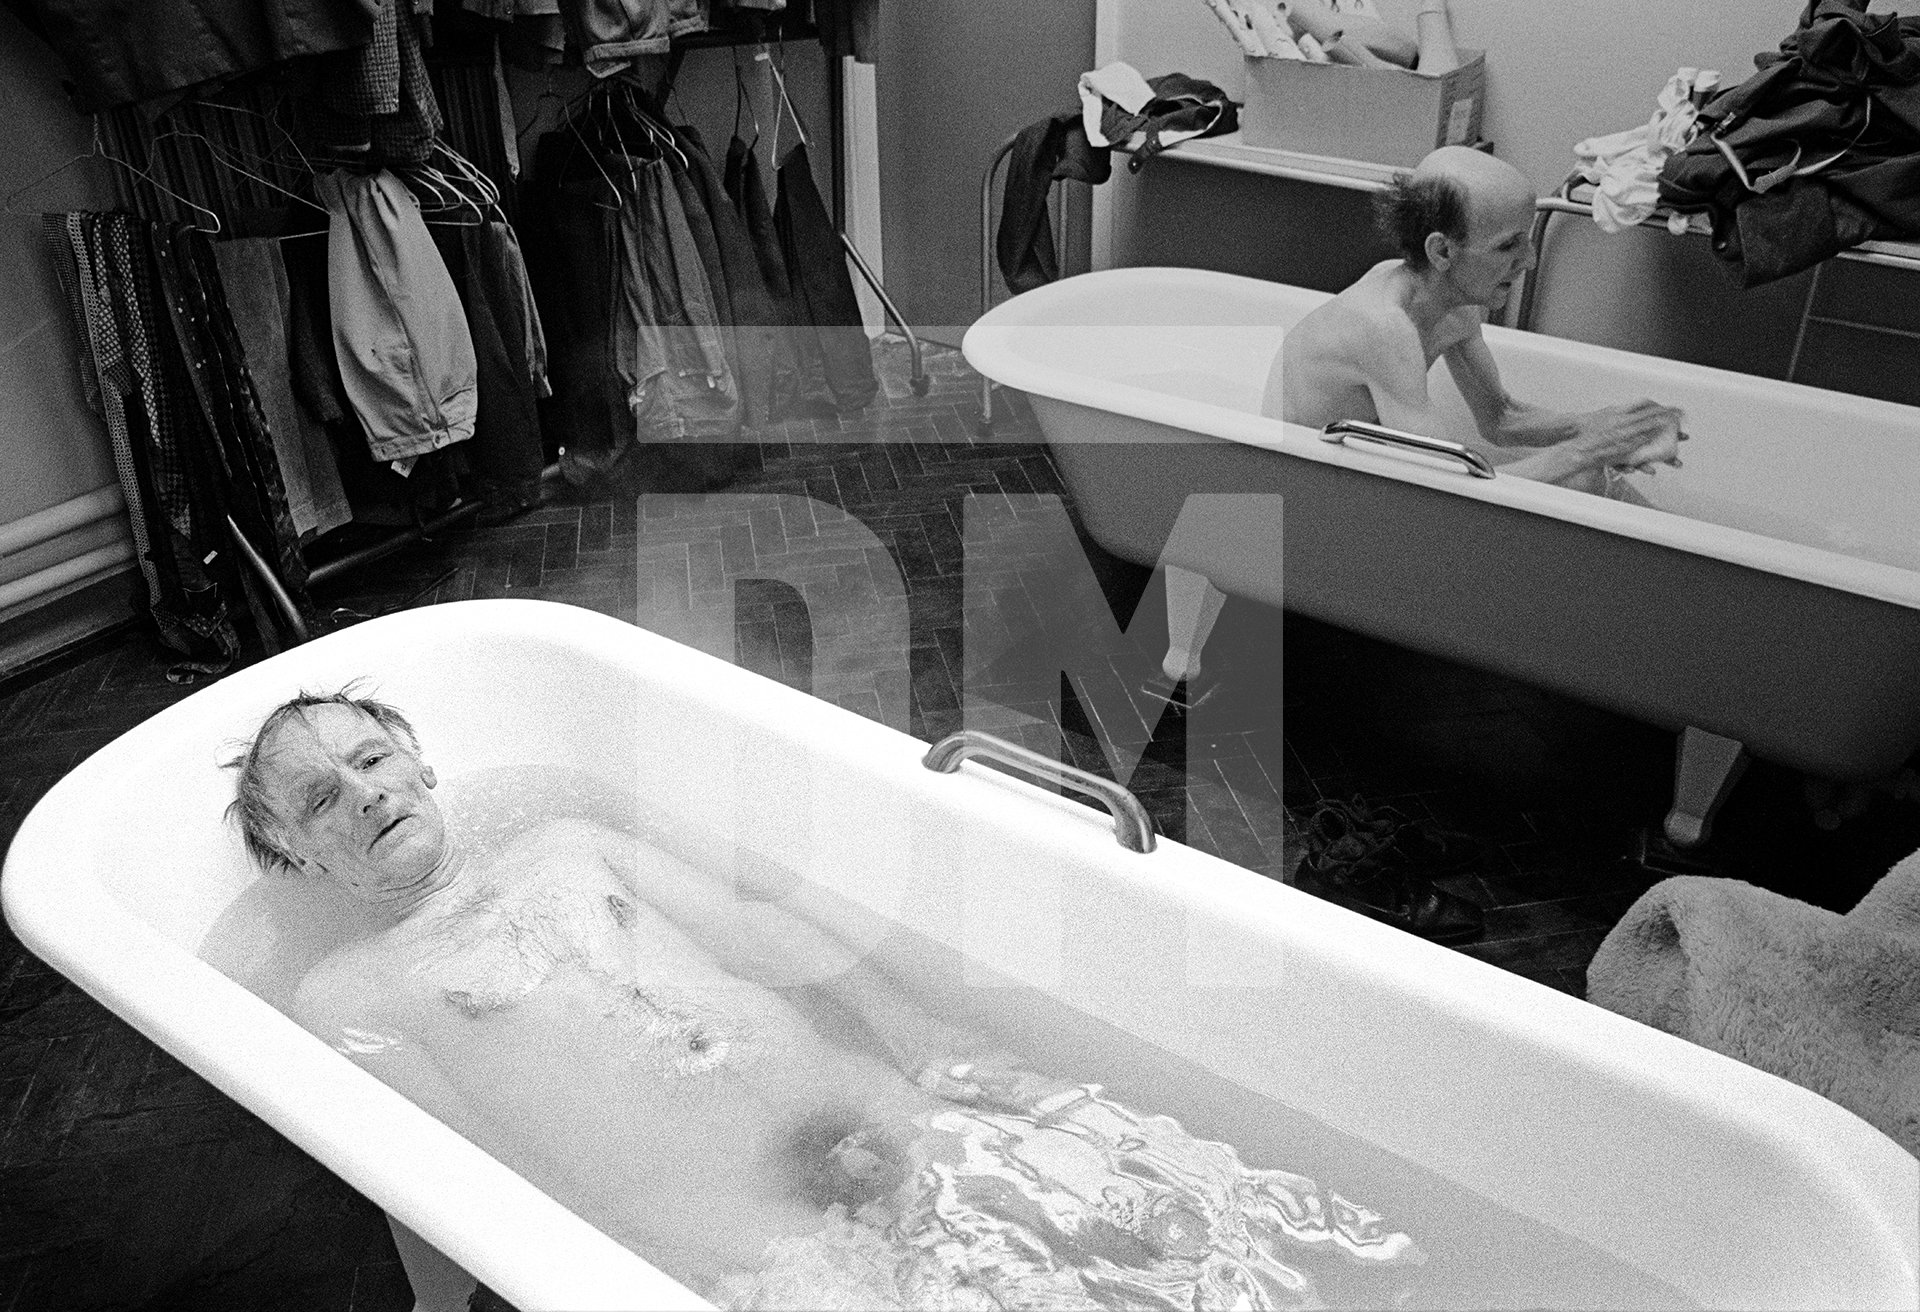 Frank Tattersall aged 56, a former turner who was admitted in 1957, takes a bath. February 1978 by Daniel Meadows